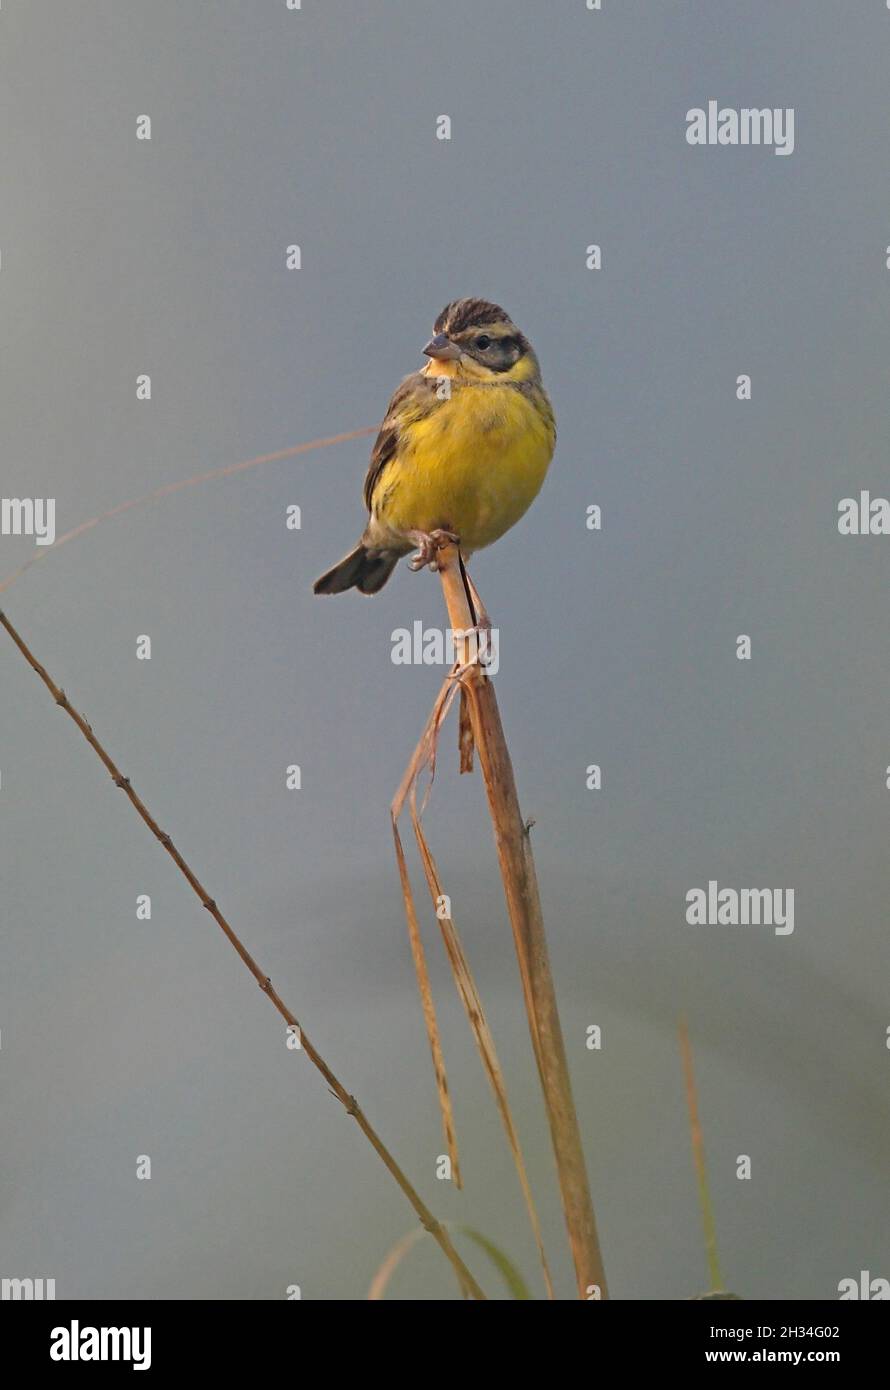 Yellow-breasted Bunting (Emberiza aureola) male in non-breeding plumage perched on dead reed Koshi Tappu, Nepal          February Stock Photo